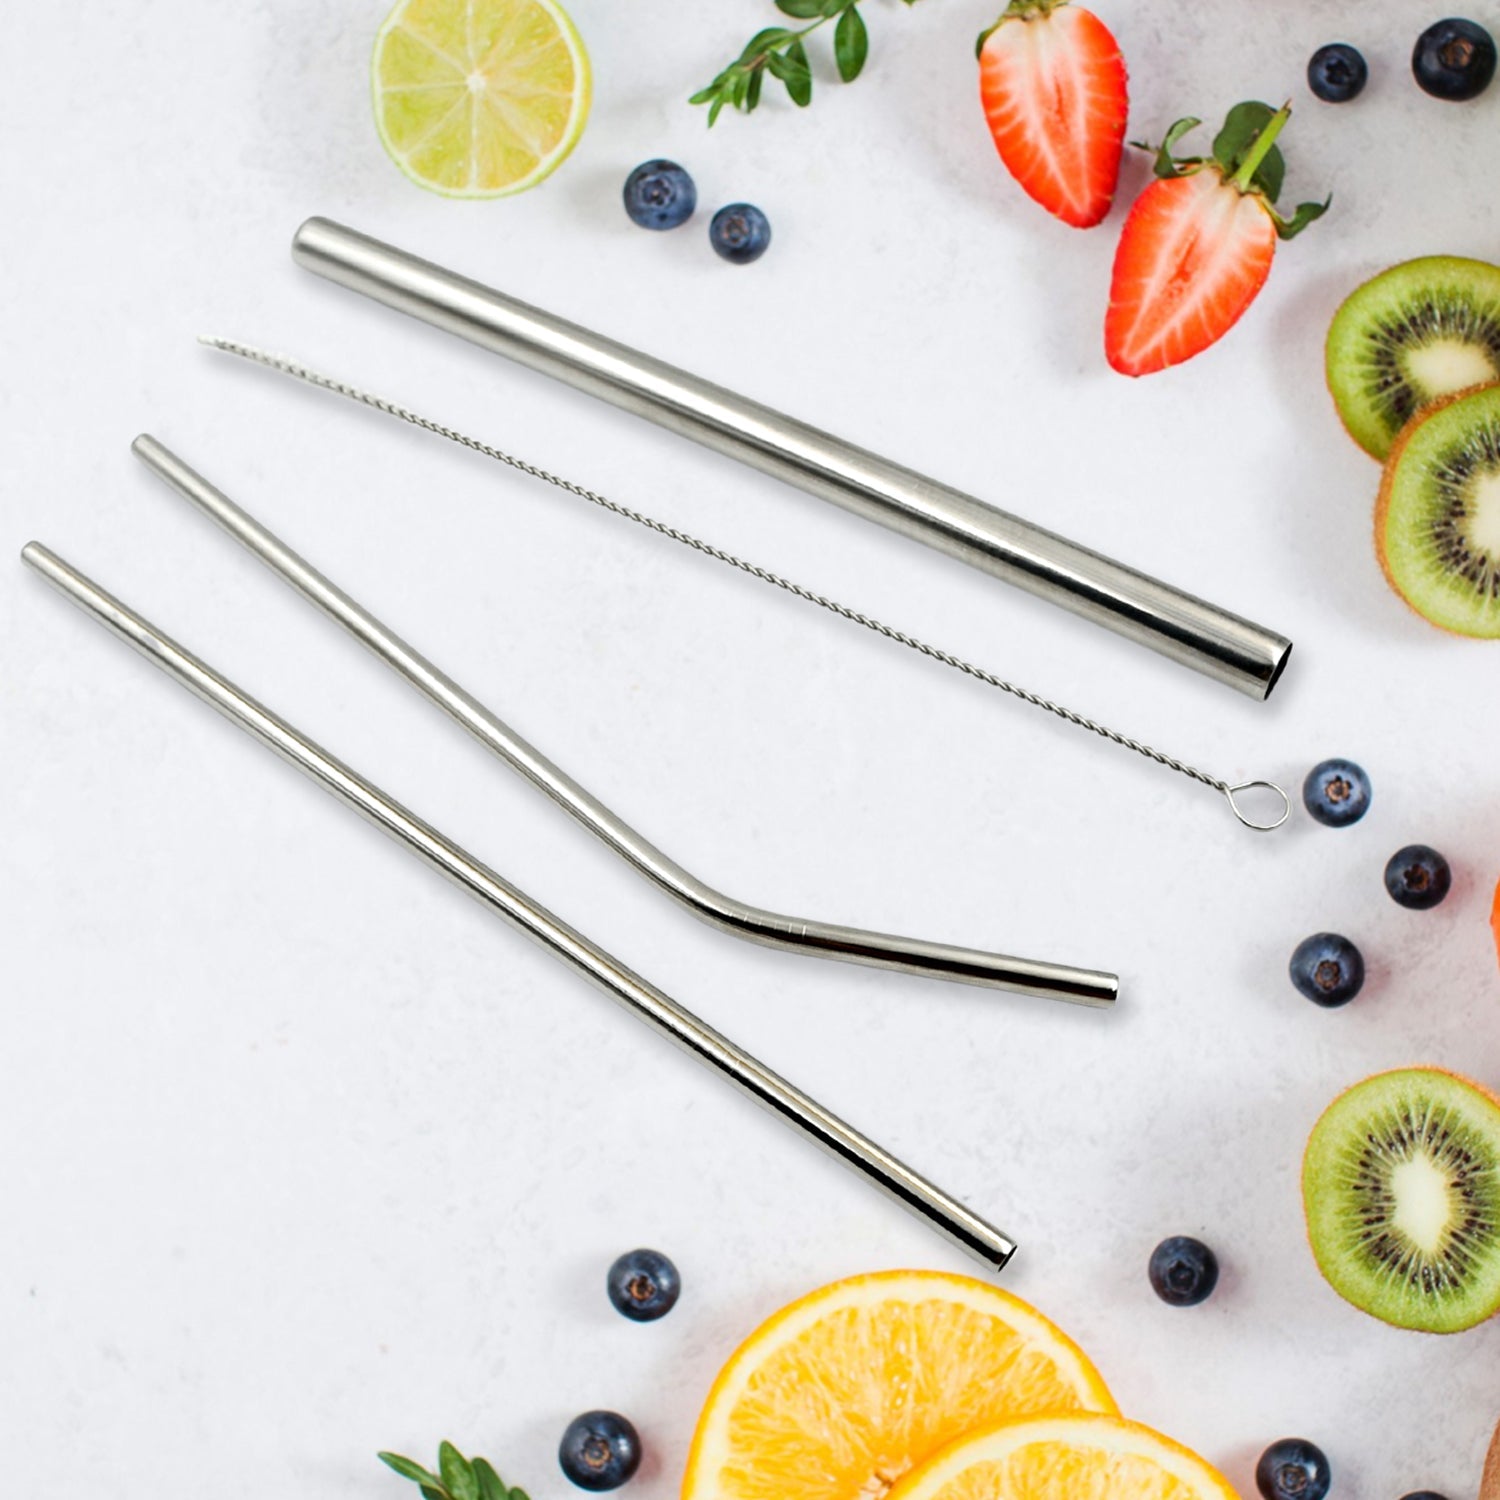 0600 Reusable Stainless Steel Straws with Travel Case Cleaning Brush Eco Friendly Extra Long Metal Straws Drinking Set of 4 (2 Straight straws, 1 Bent straws, 1 Brush)